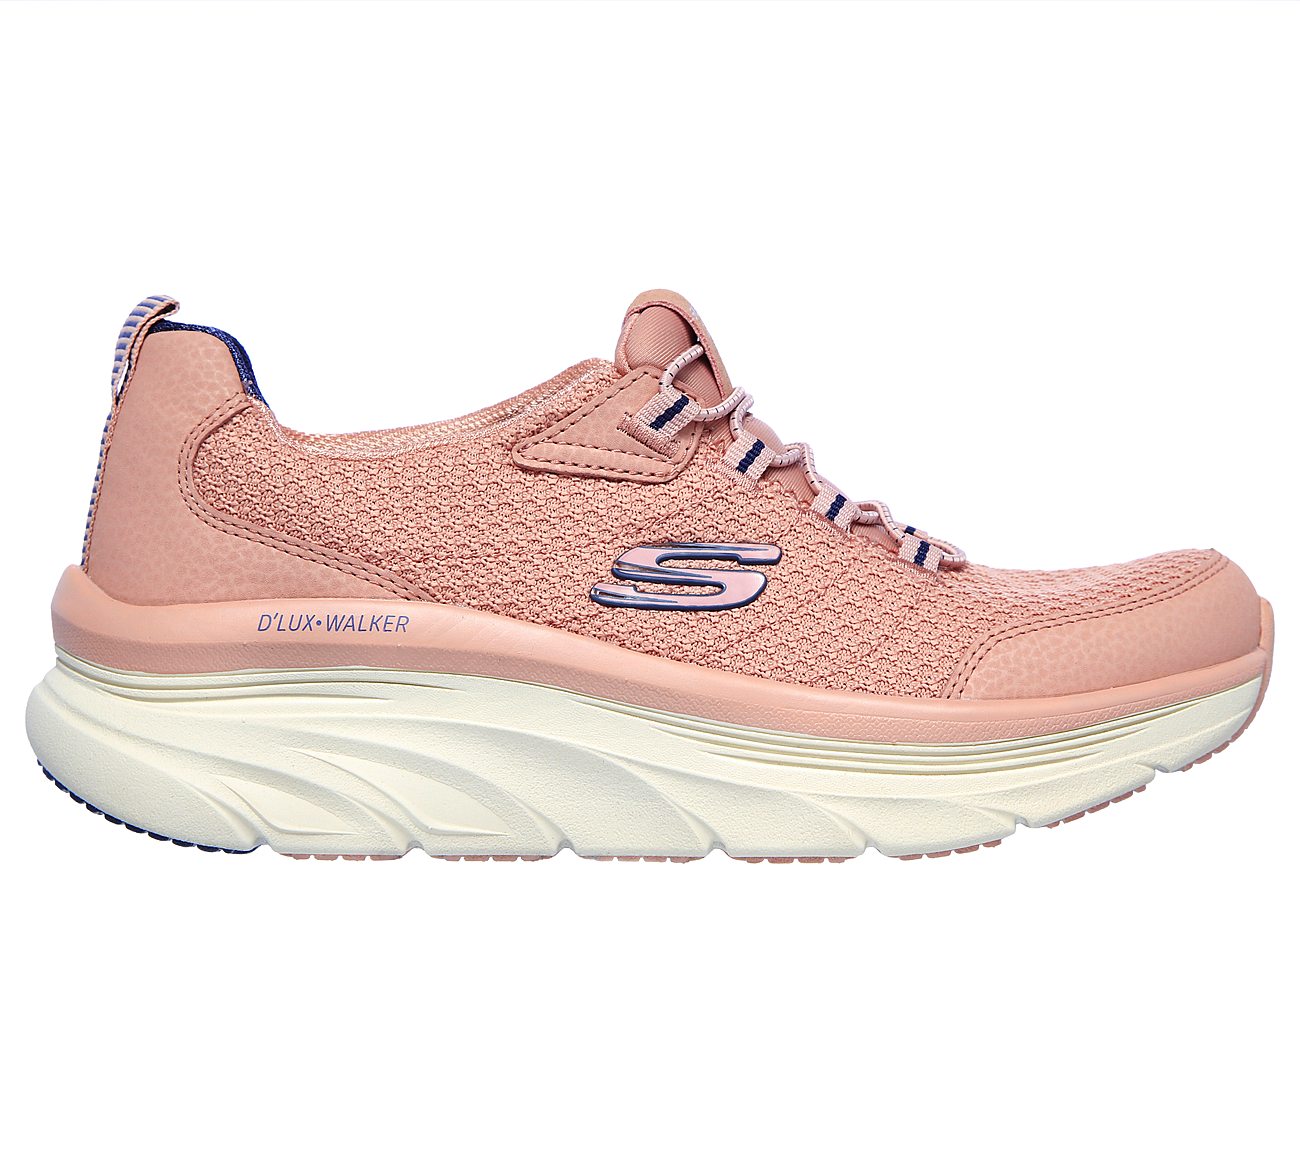 D'LUX WALKER - RUNNING VISION, ROSE Footwear Lateral View